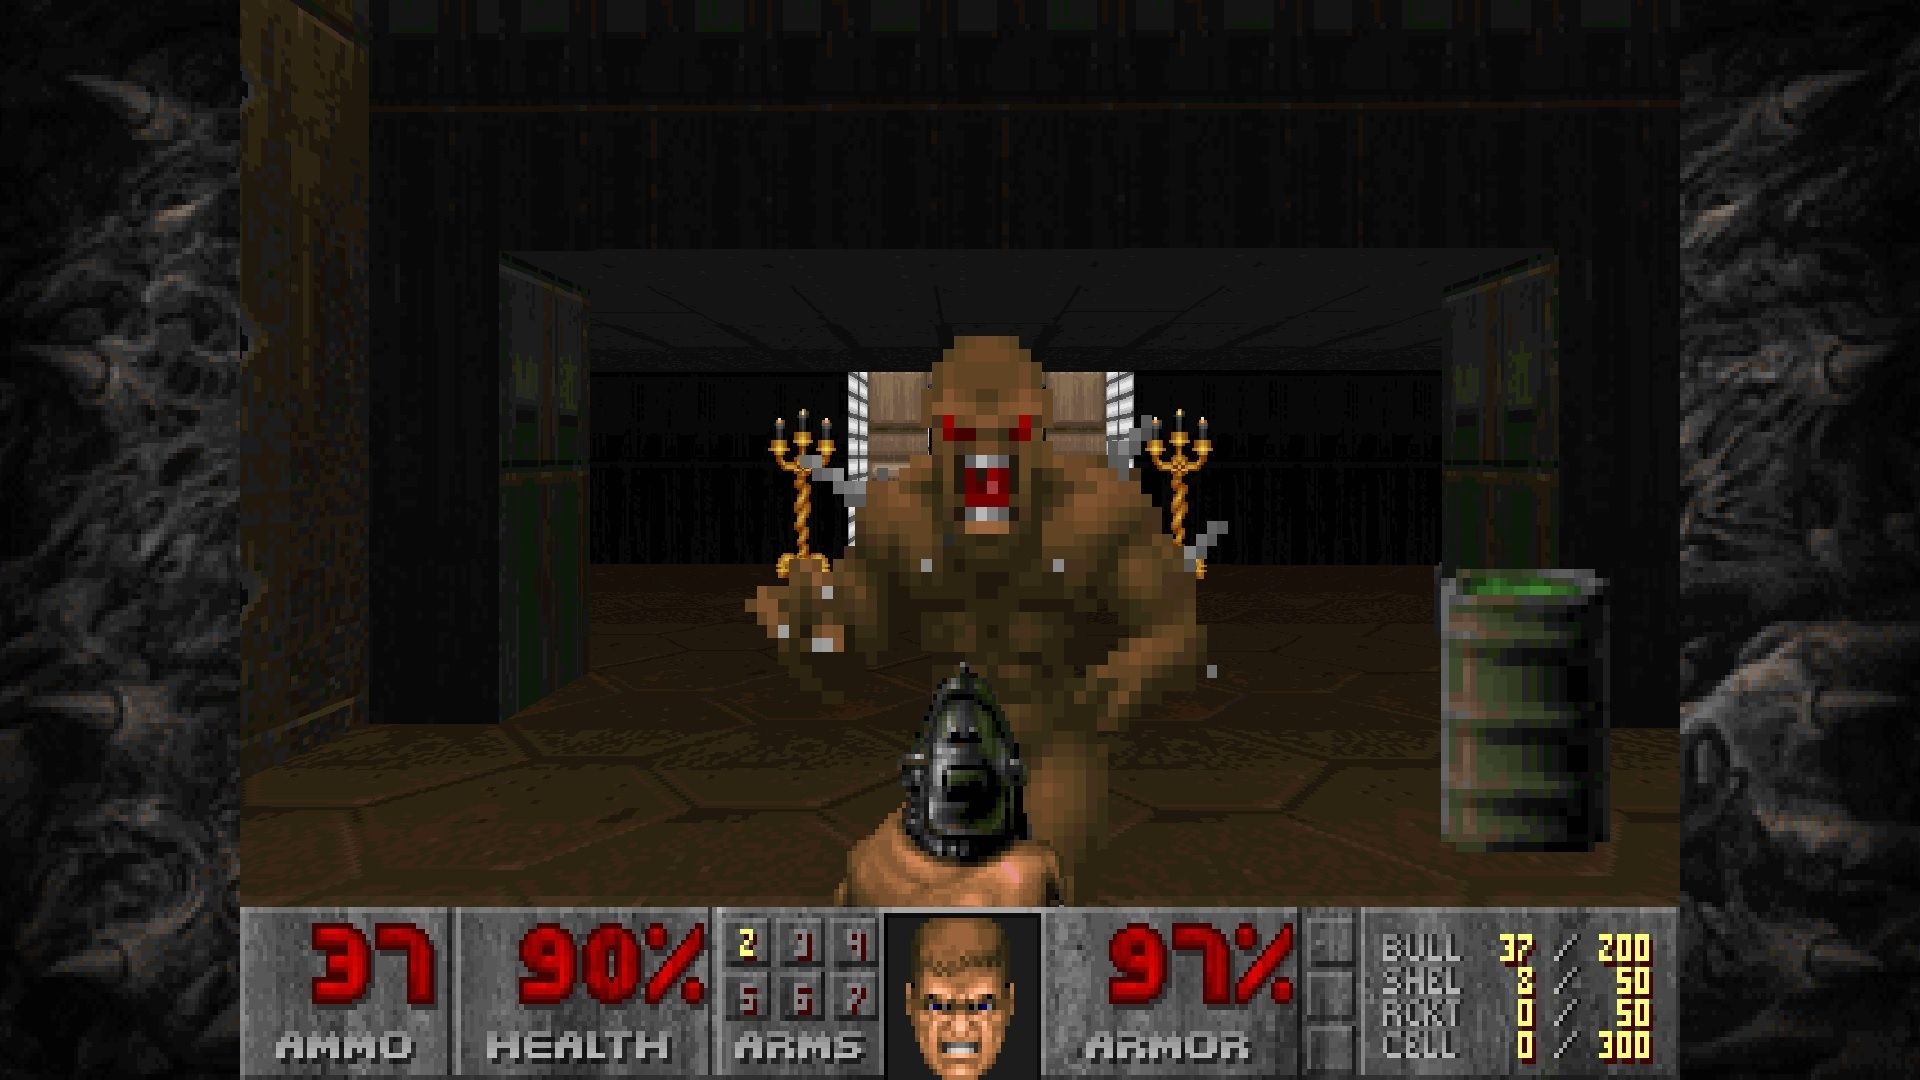 A demon in a chamber, from a first-person perspective with the character holding a pistol, in Doom.